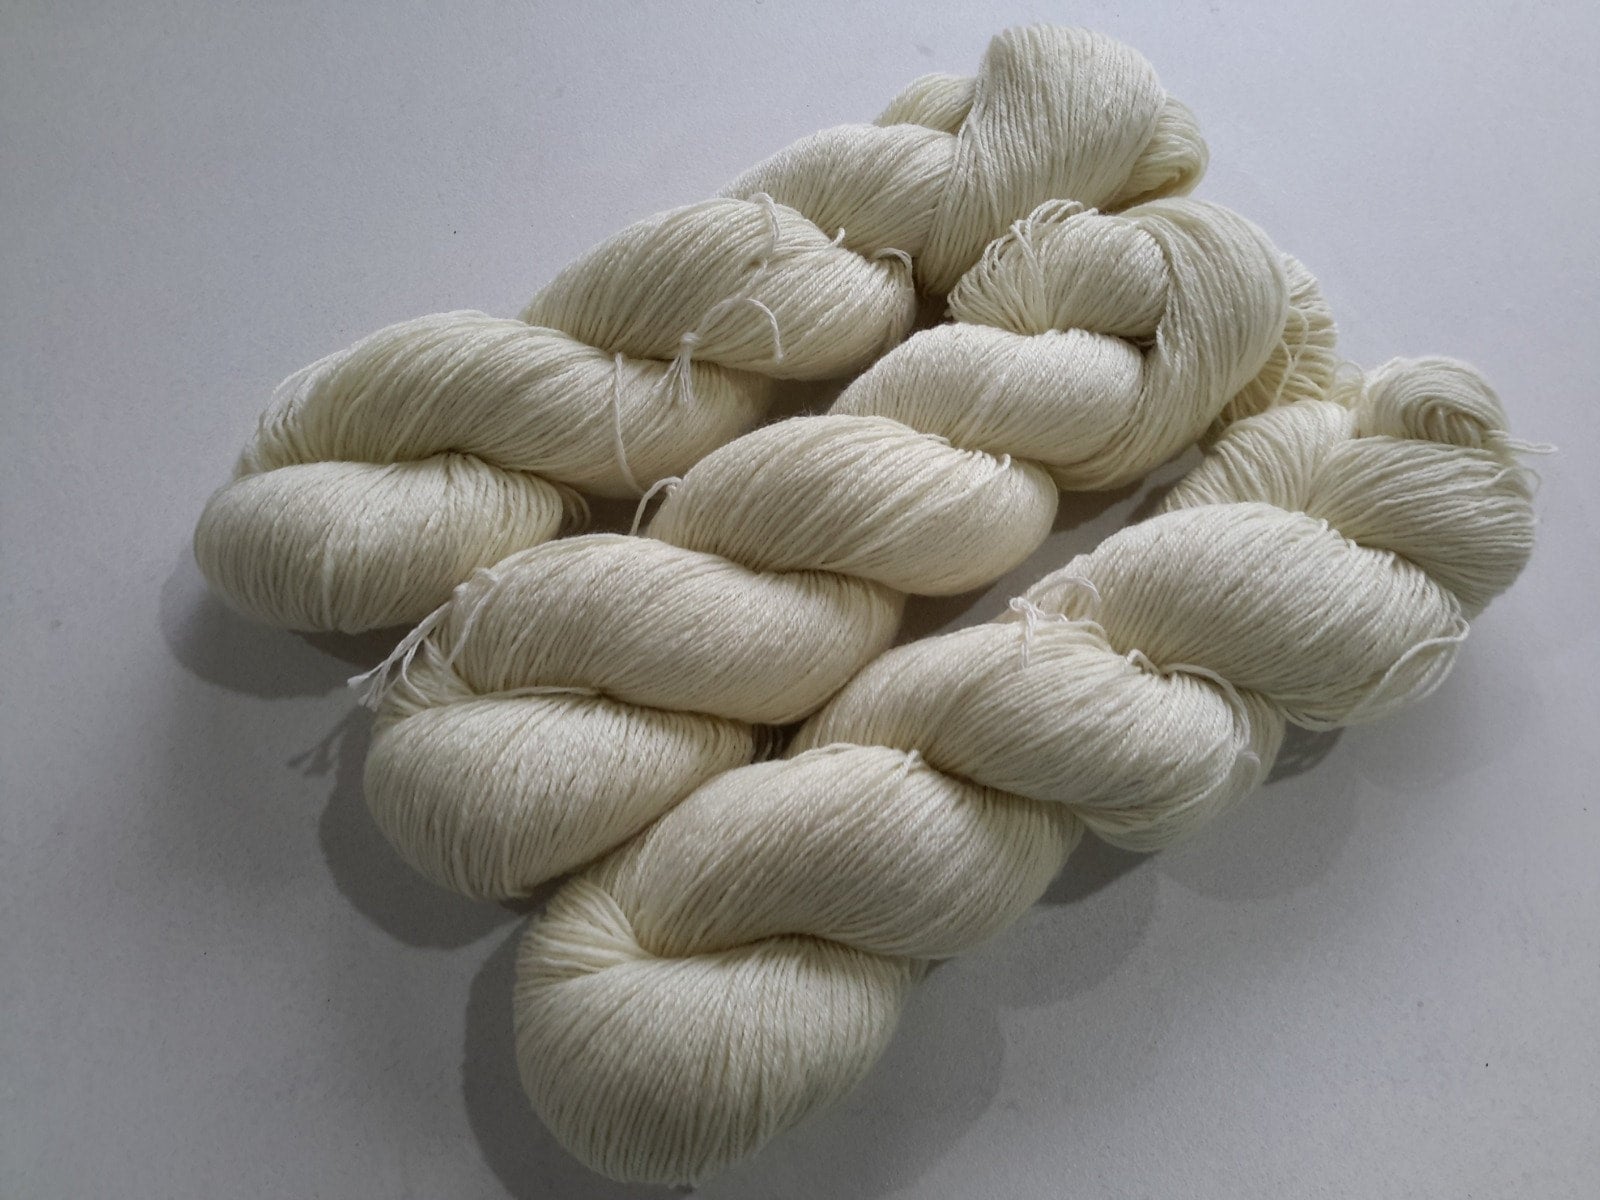 Natural Undyed Yarn For Hand Dyeing - Hand Dyed Yarn Supplies Australia